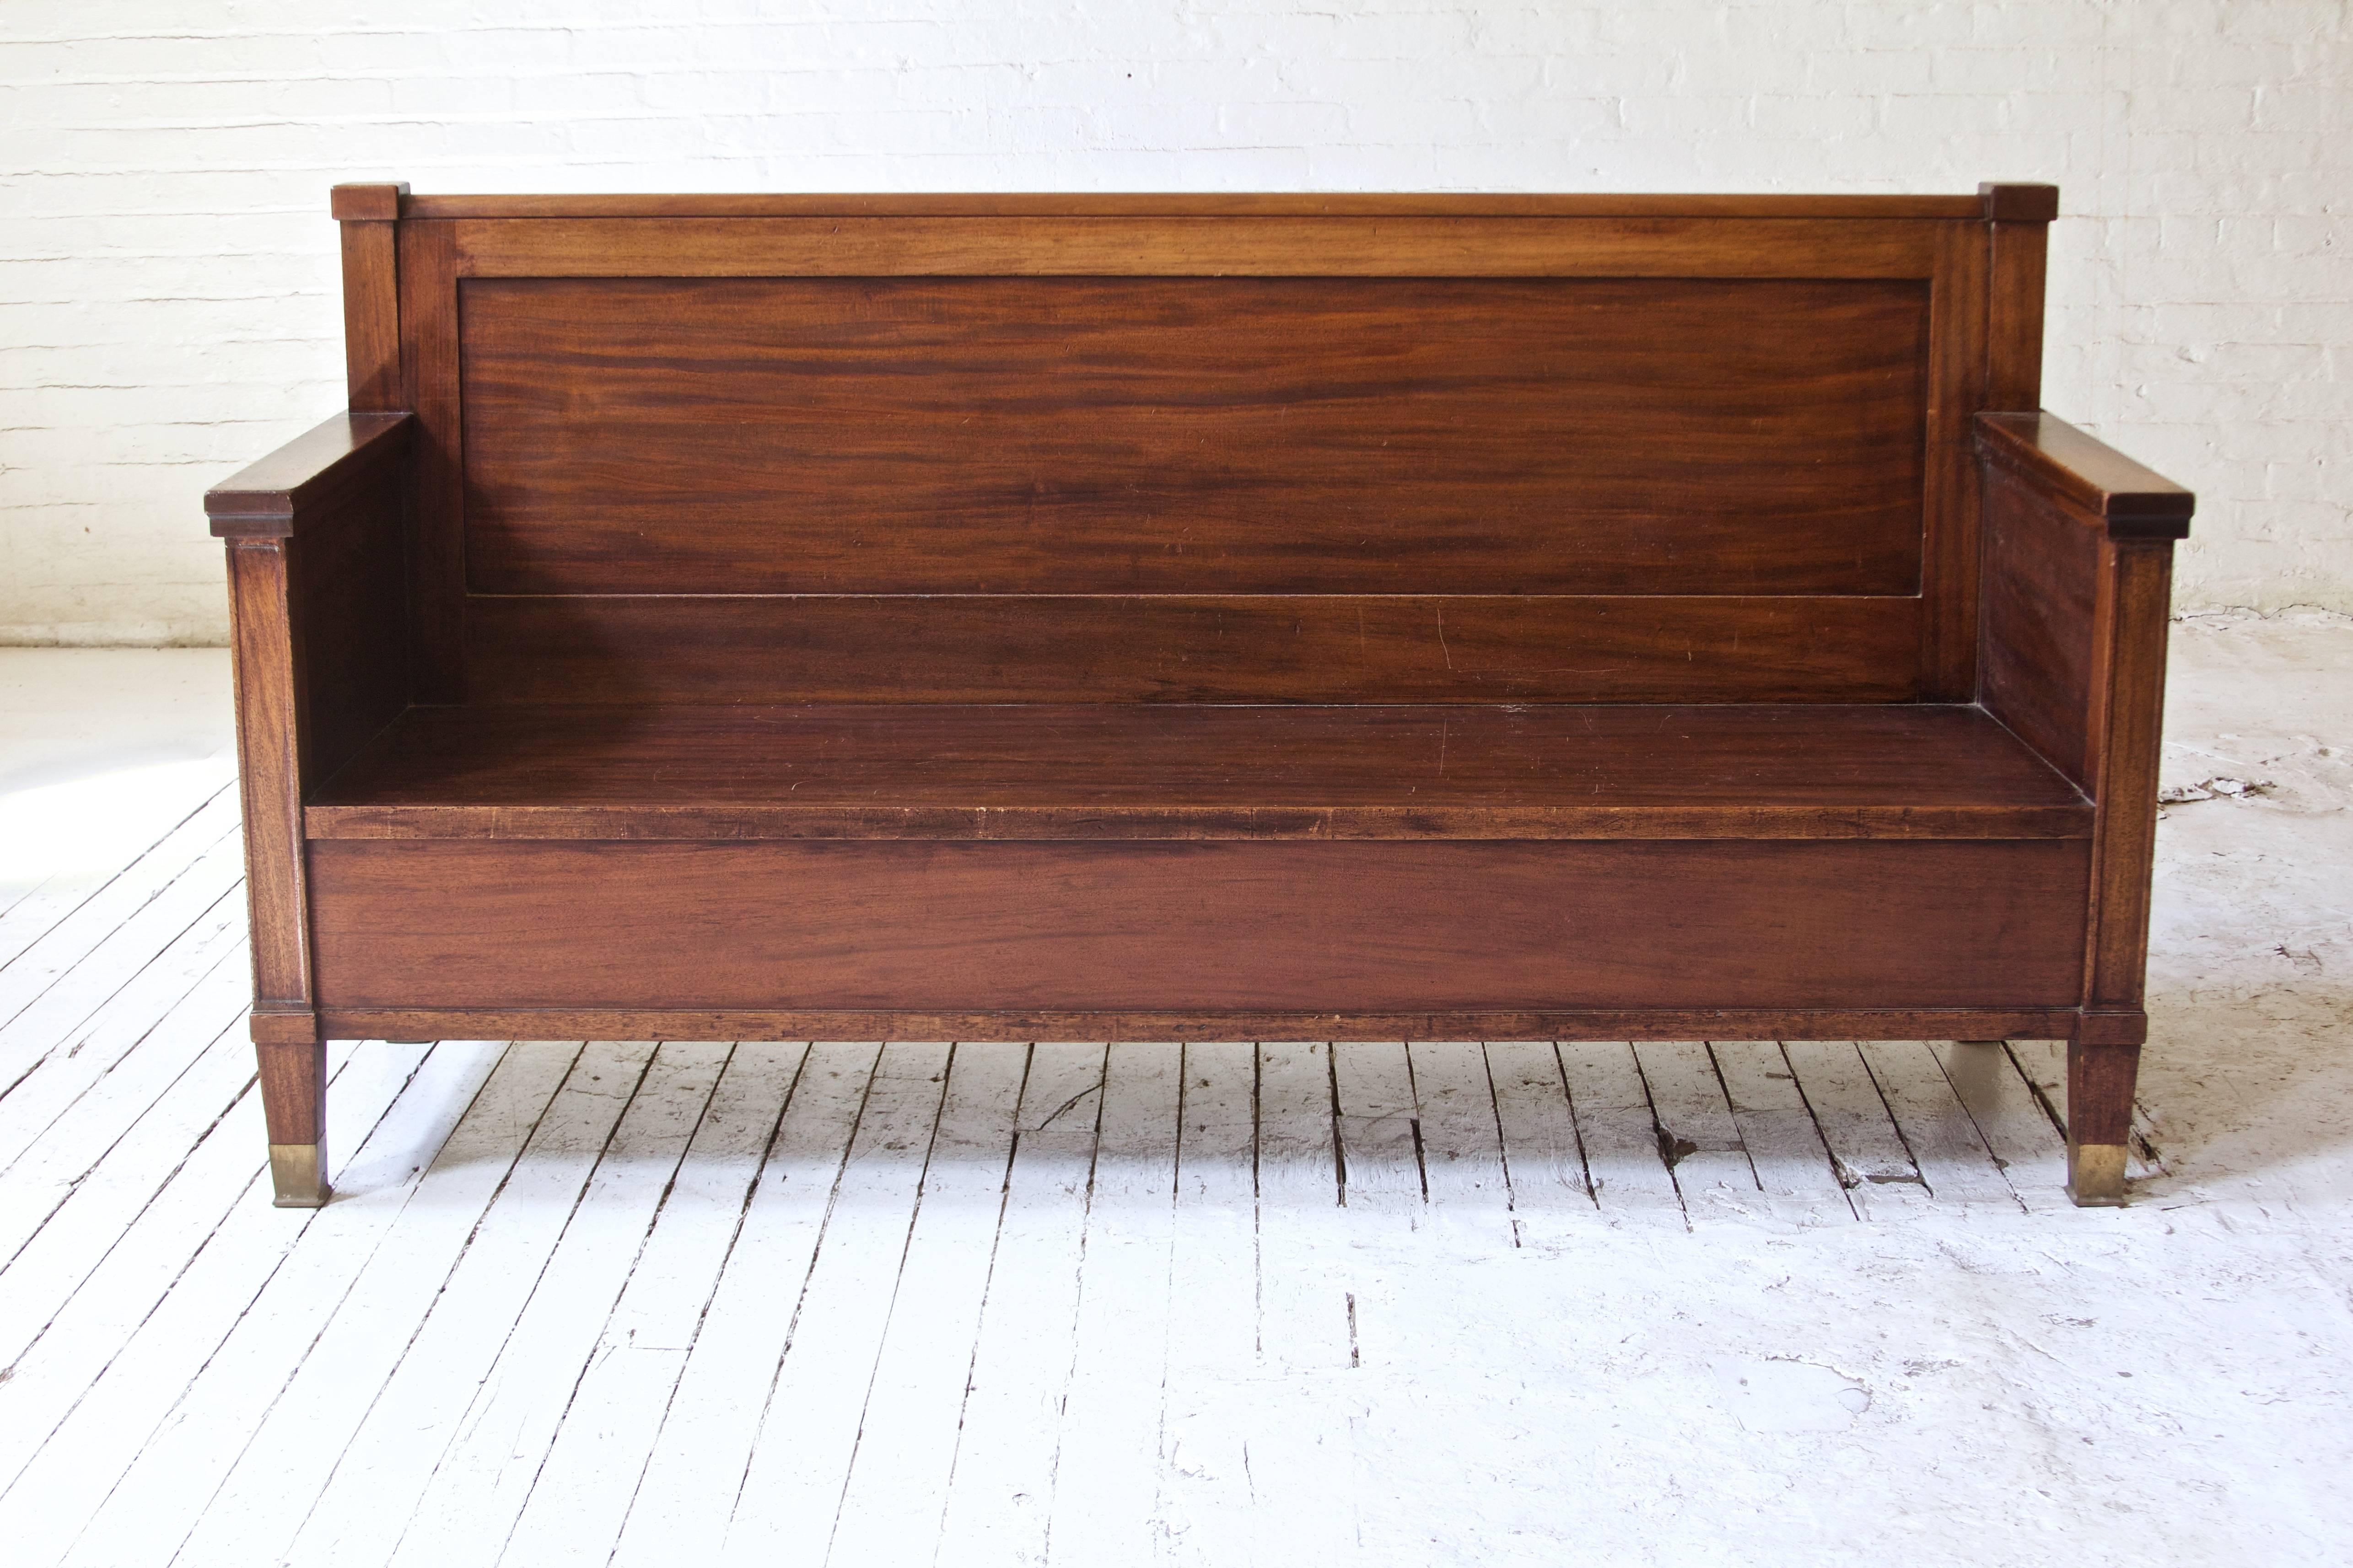 Robust antique English bench in highly-figured Cuban Mahogany with brass sabots; in the Gothic Revival style of the late 19th century, circa 1890.